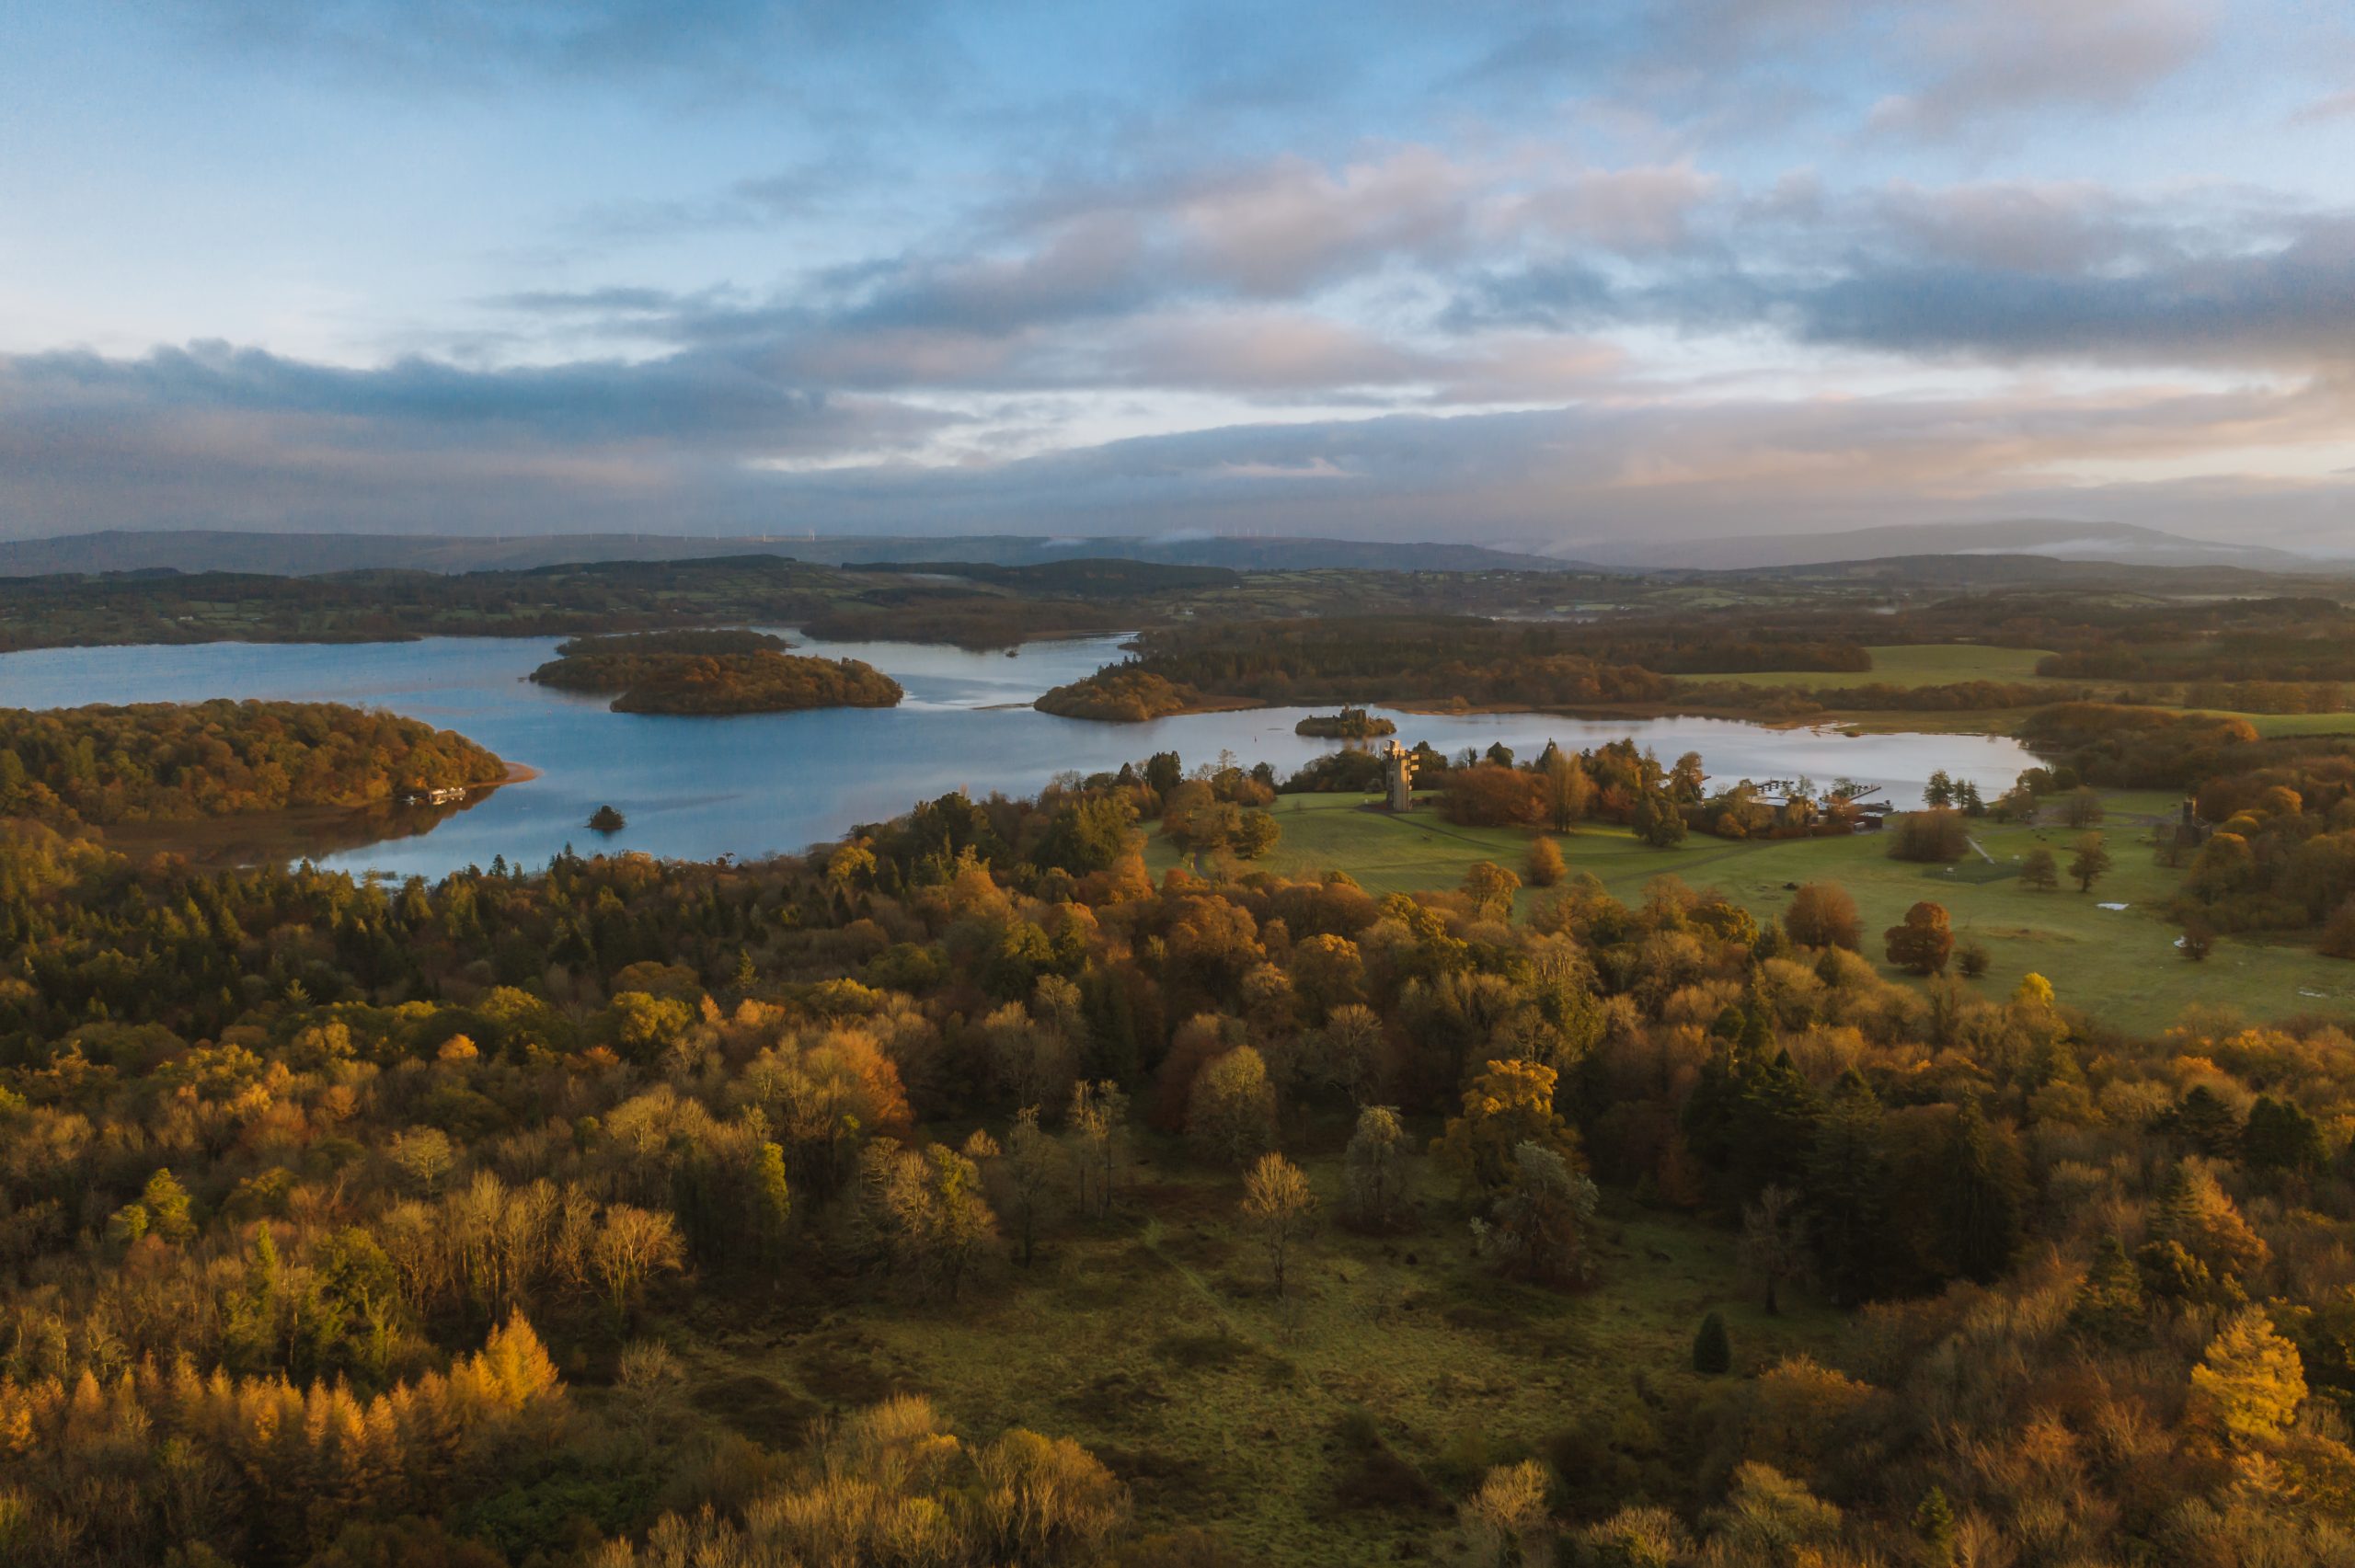 Coillte announces Sustainable Development Plan for Lough Key Forest and Activity Park in conjunction with Roscommon County Council